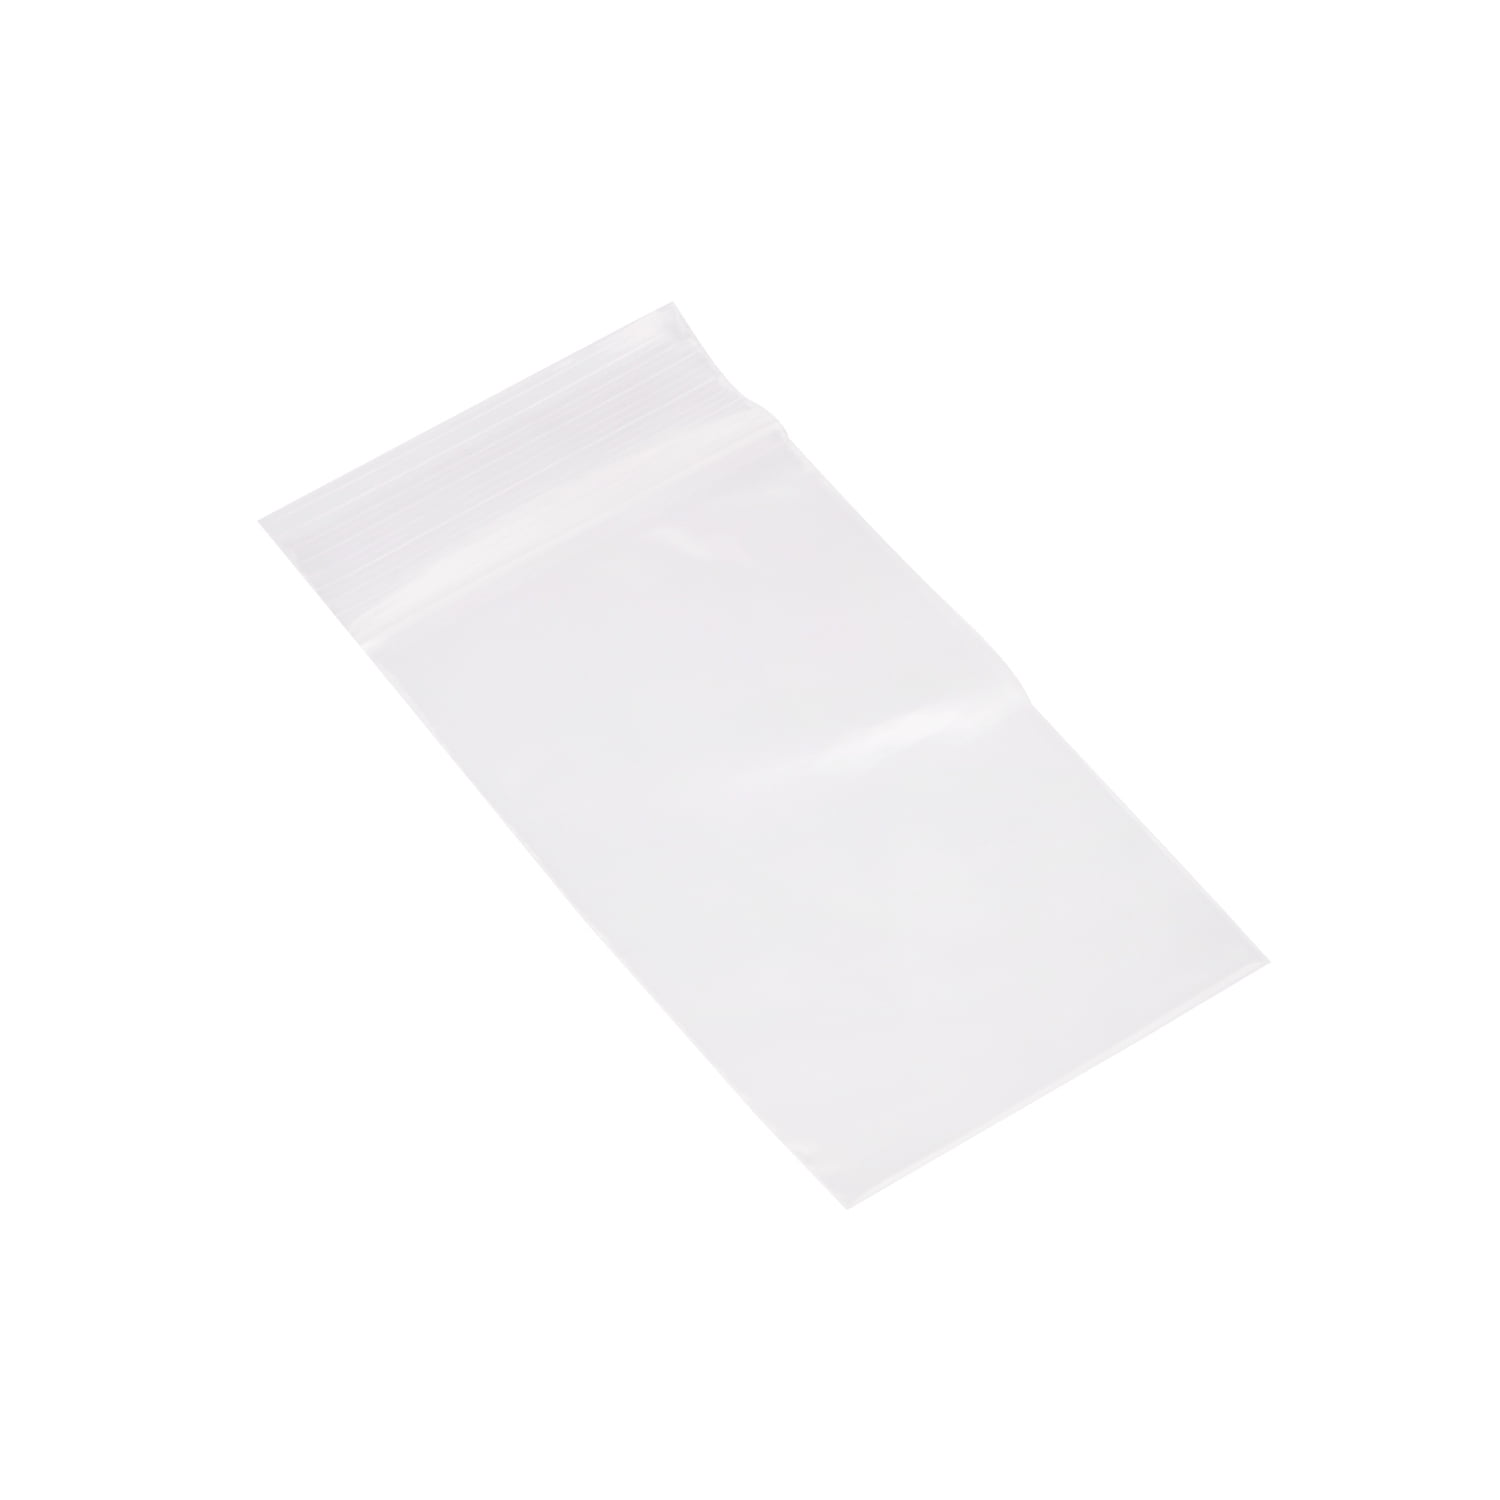 1,400 ZIP LOCK BAGS 2MIL CLEAR POLY BAG ALL SIZES & SHAPES 14 ASSORTED LZ 5.2 R BOX A 100 PER 